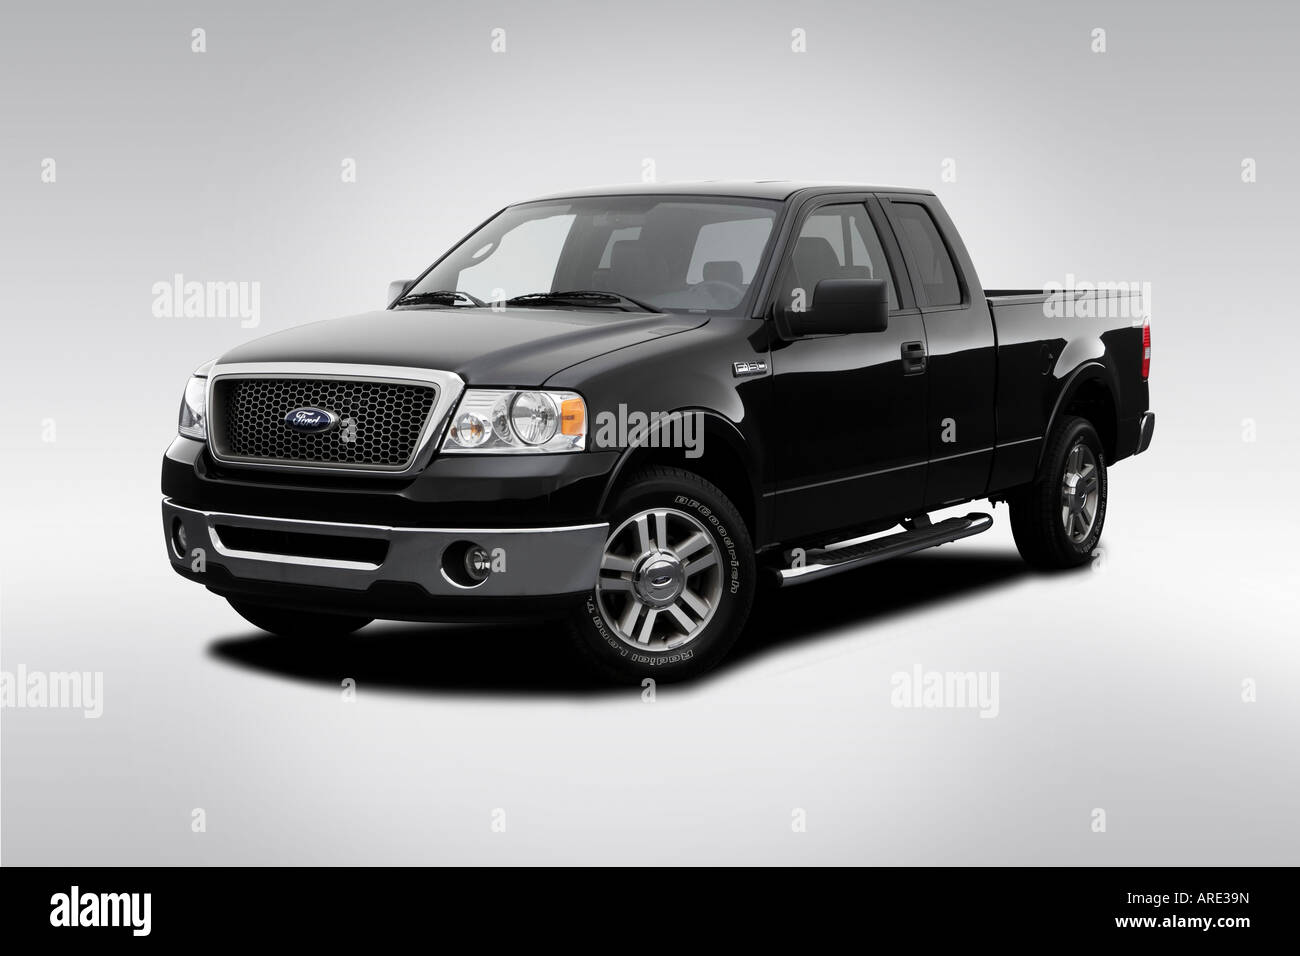 2006 Ford F-150 Lariat in Black - Front angle view Stock Photo - Alamy